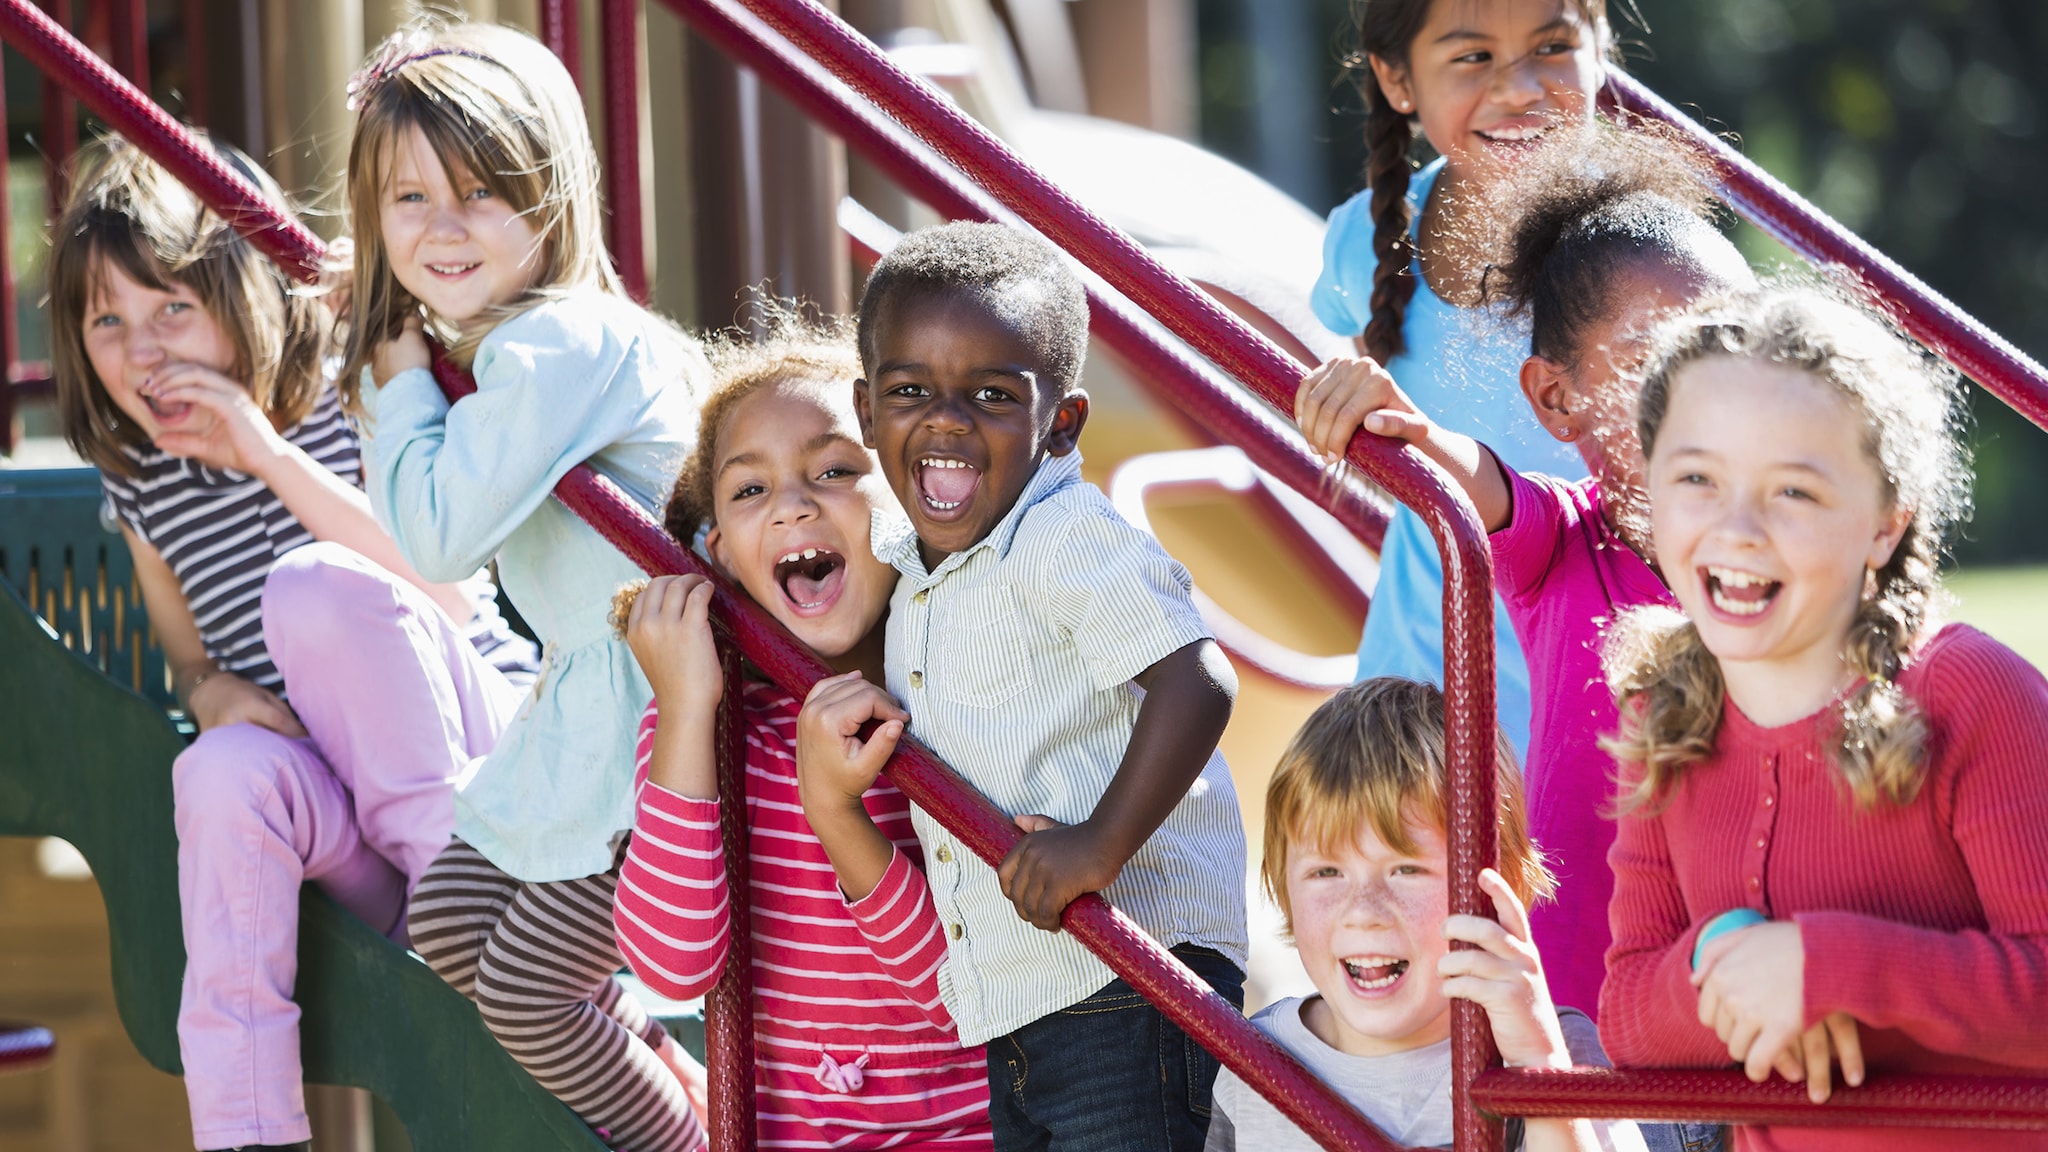 Smiling group of kids on an outside staircase.